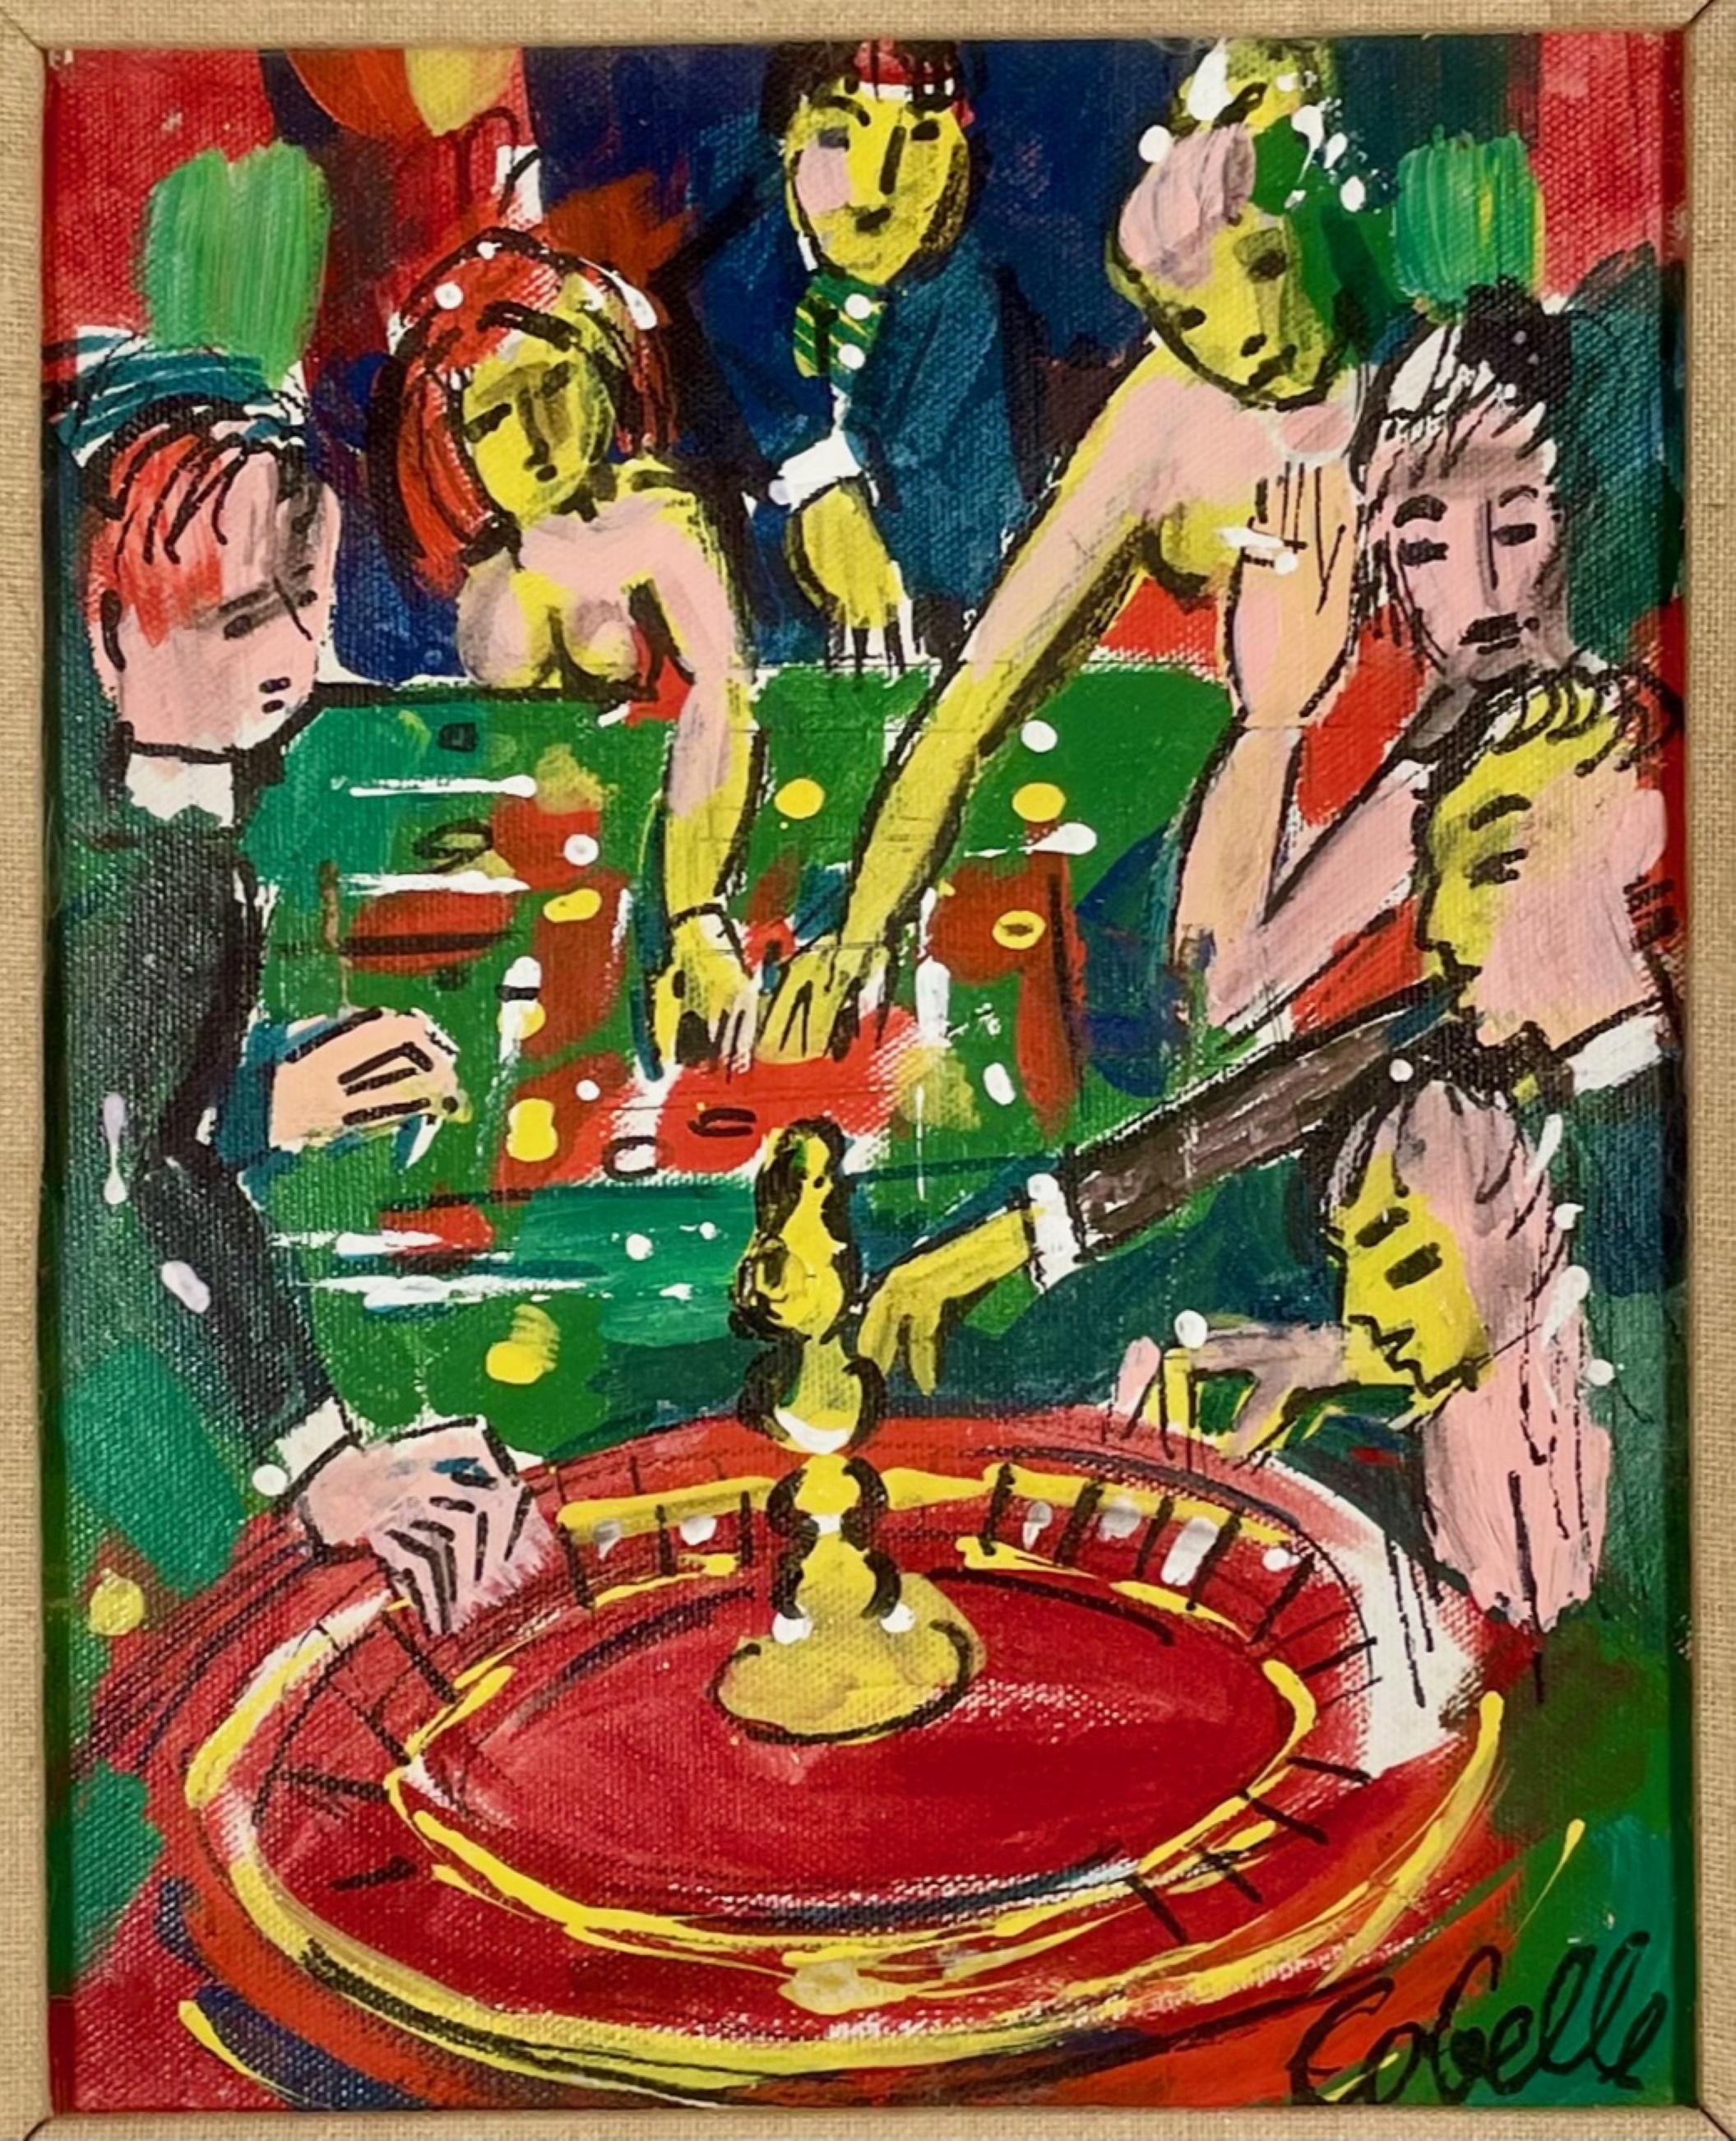 Modern French Master painting “Casino” signed Cobelle (1902-1994).

The game of Roulette is captured in this exciting painting by one of the last great artists of the Open Line School of Paris. Charles Cobelle favored subjects, Paris street